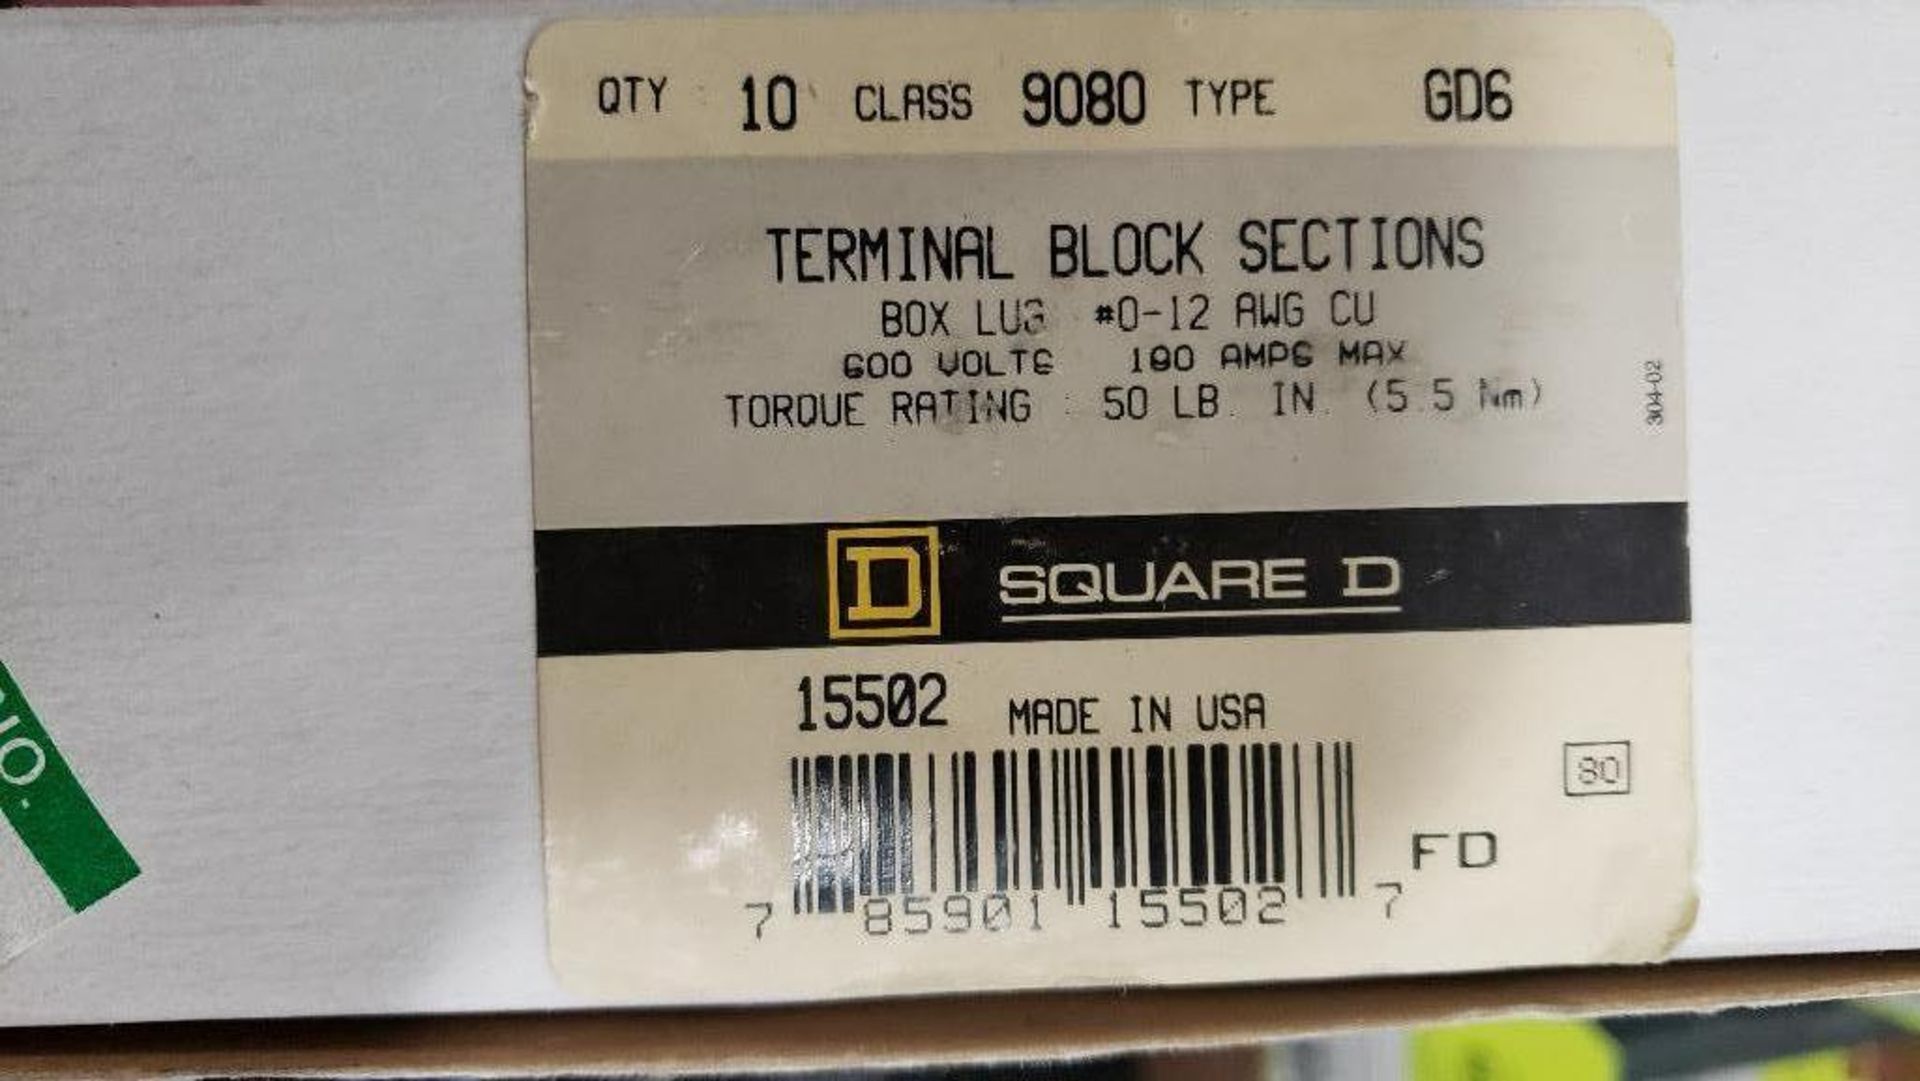 Qty 100 - Square D terminal block sections. Class 9080 type GD6. New in bulk box. - Image 2 of 5